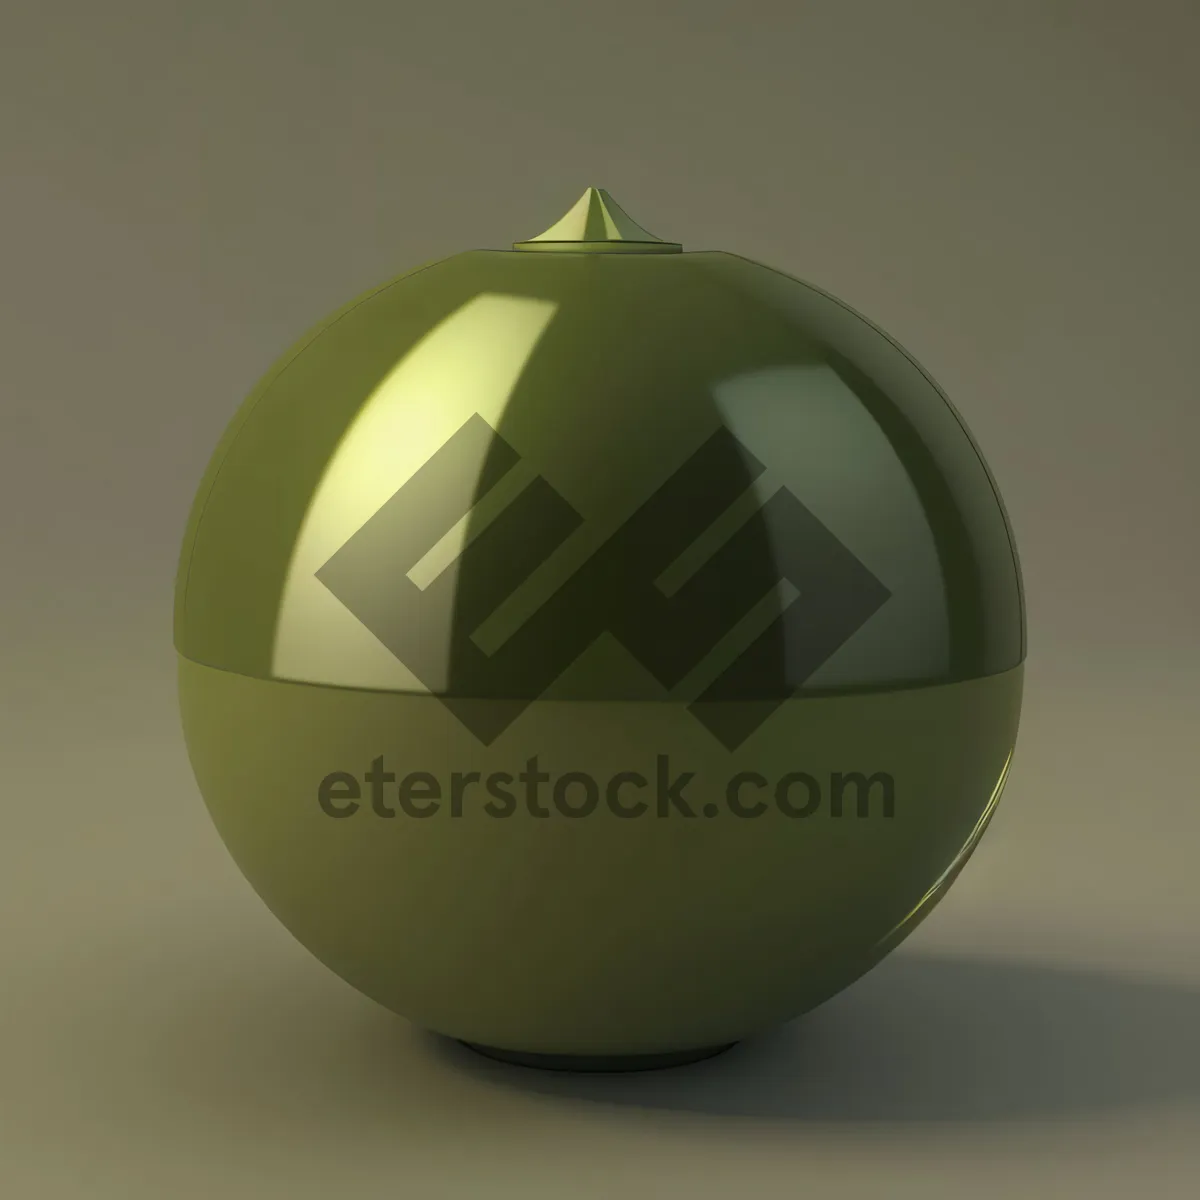 Picture of Glass Egg: Solid Matter Sphere, Ball Design Symbol